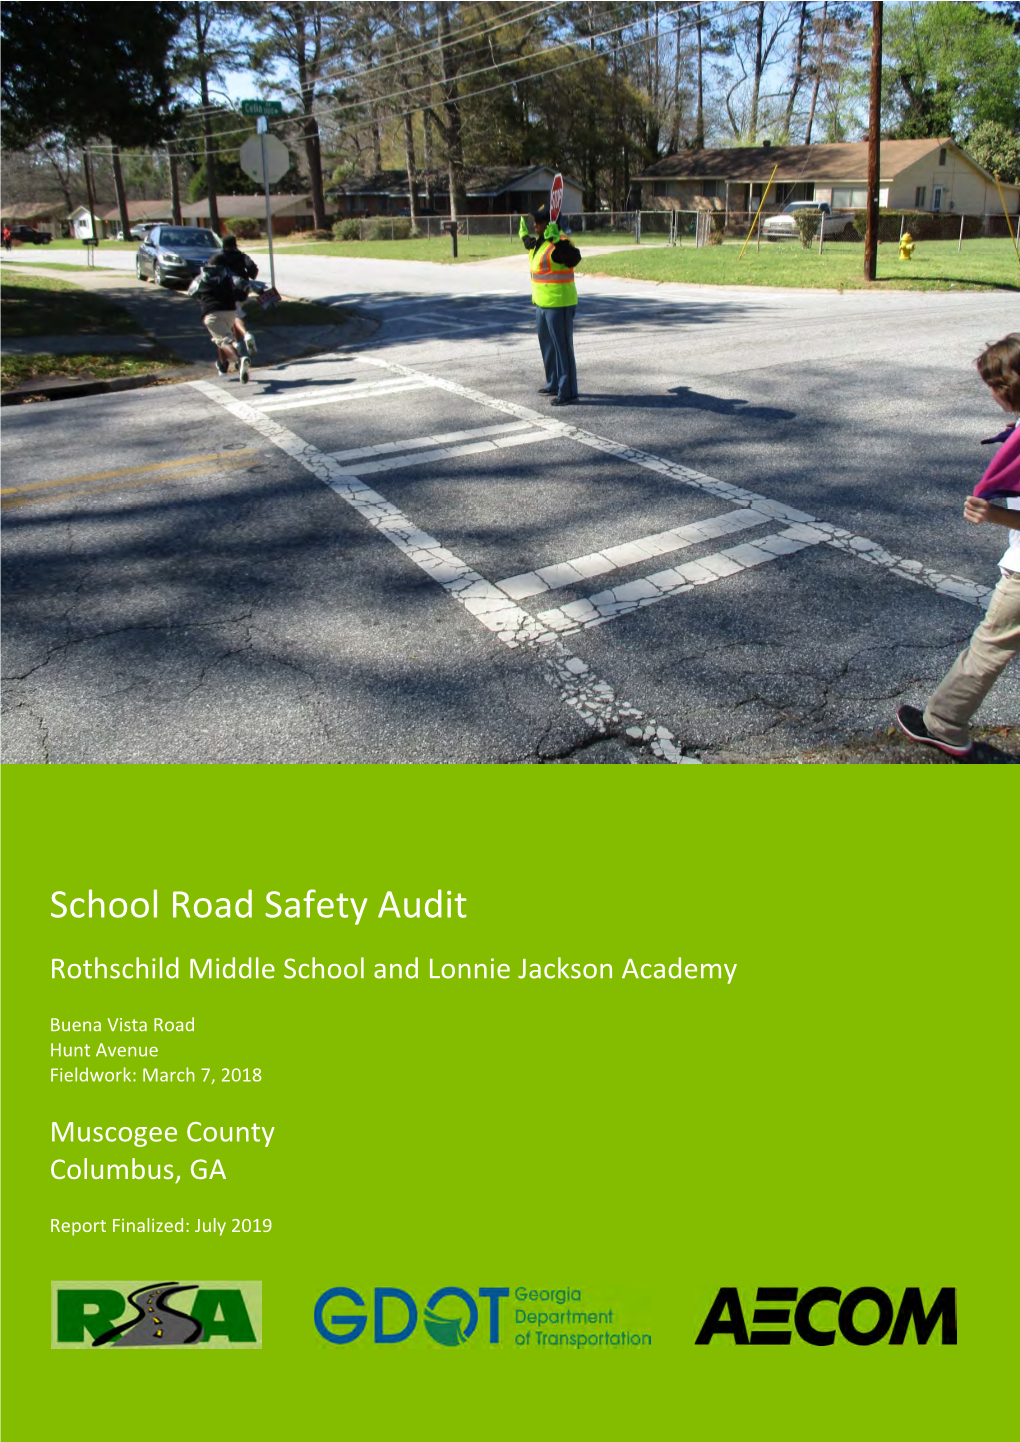 School Road Safety Audit Rothschild Middle School and Lonnie Jackson Academy